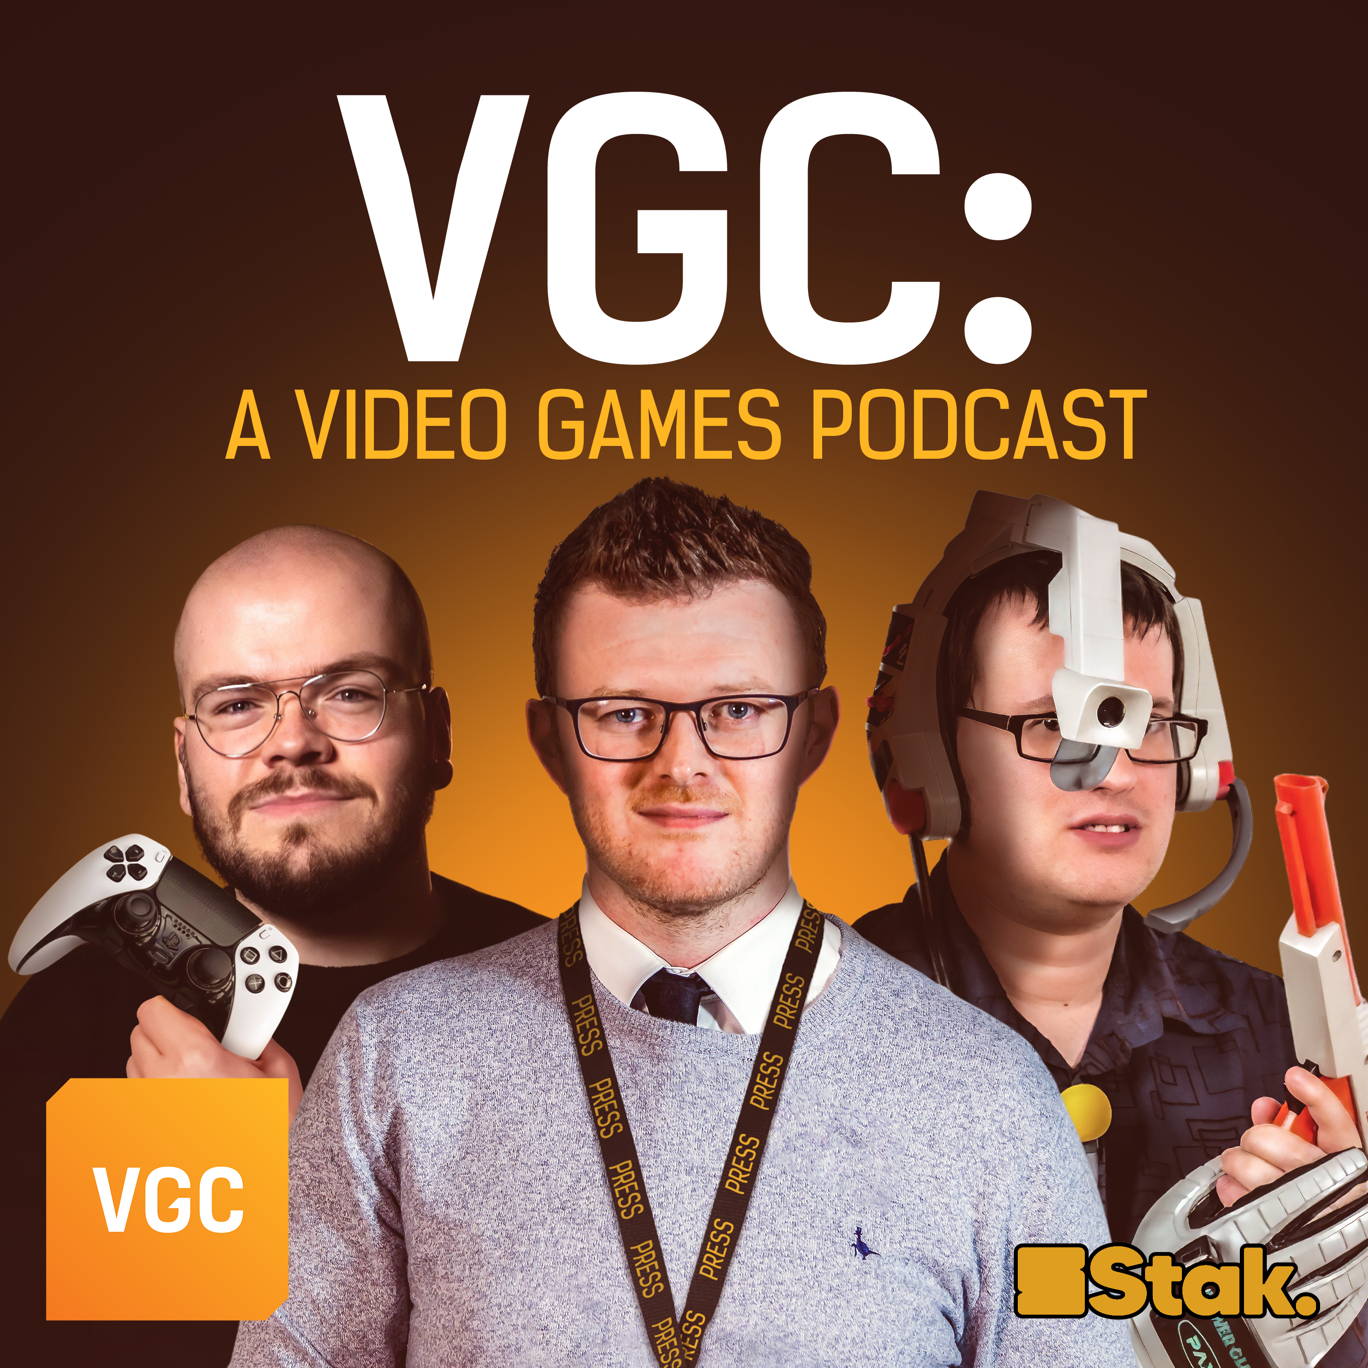 The artwork for the VGC: a video games podcast podcast.